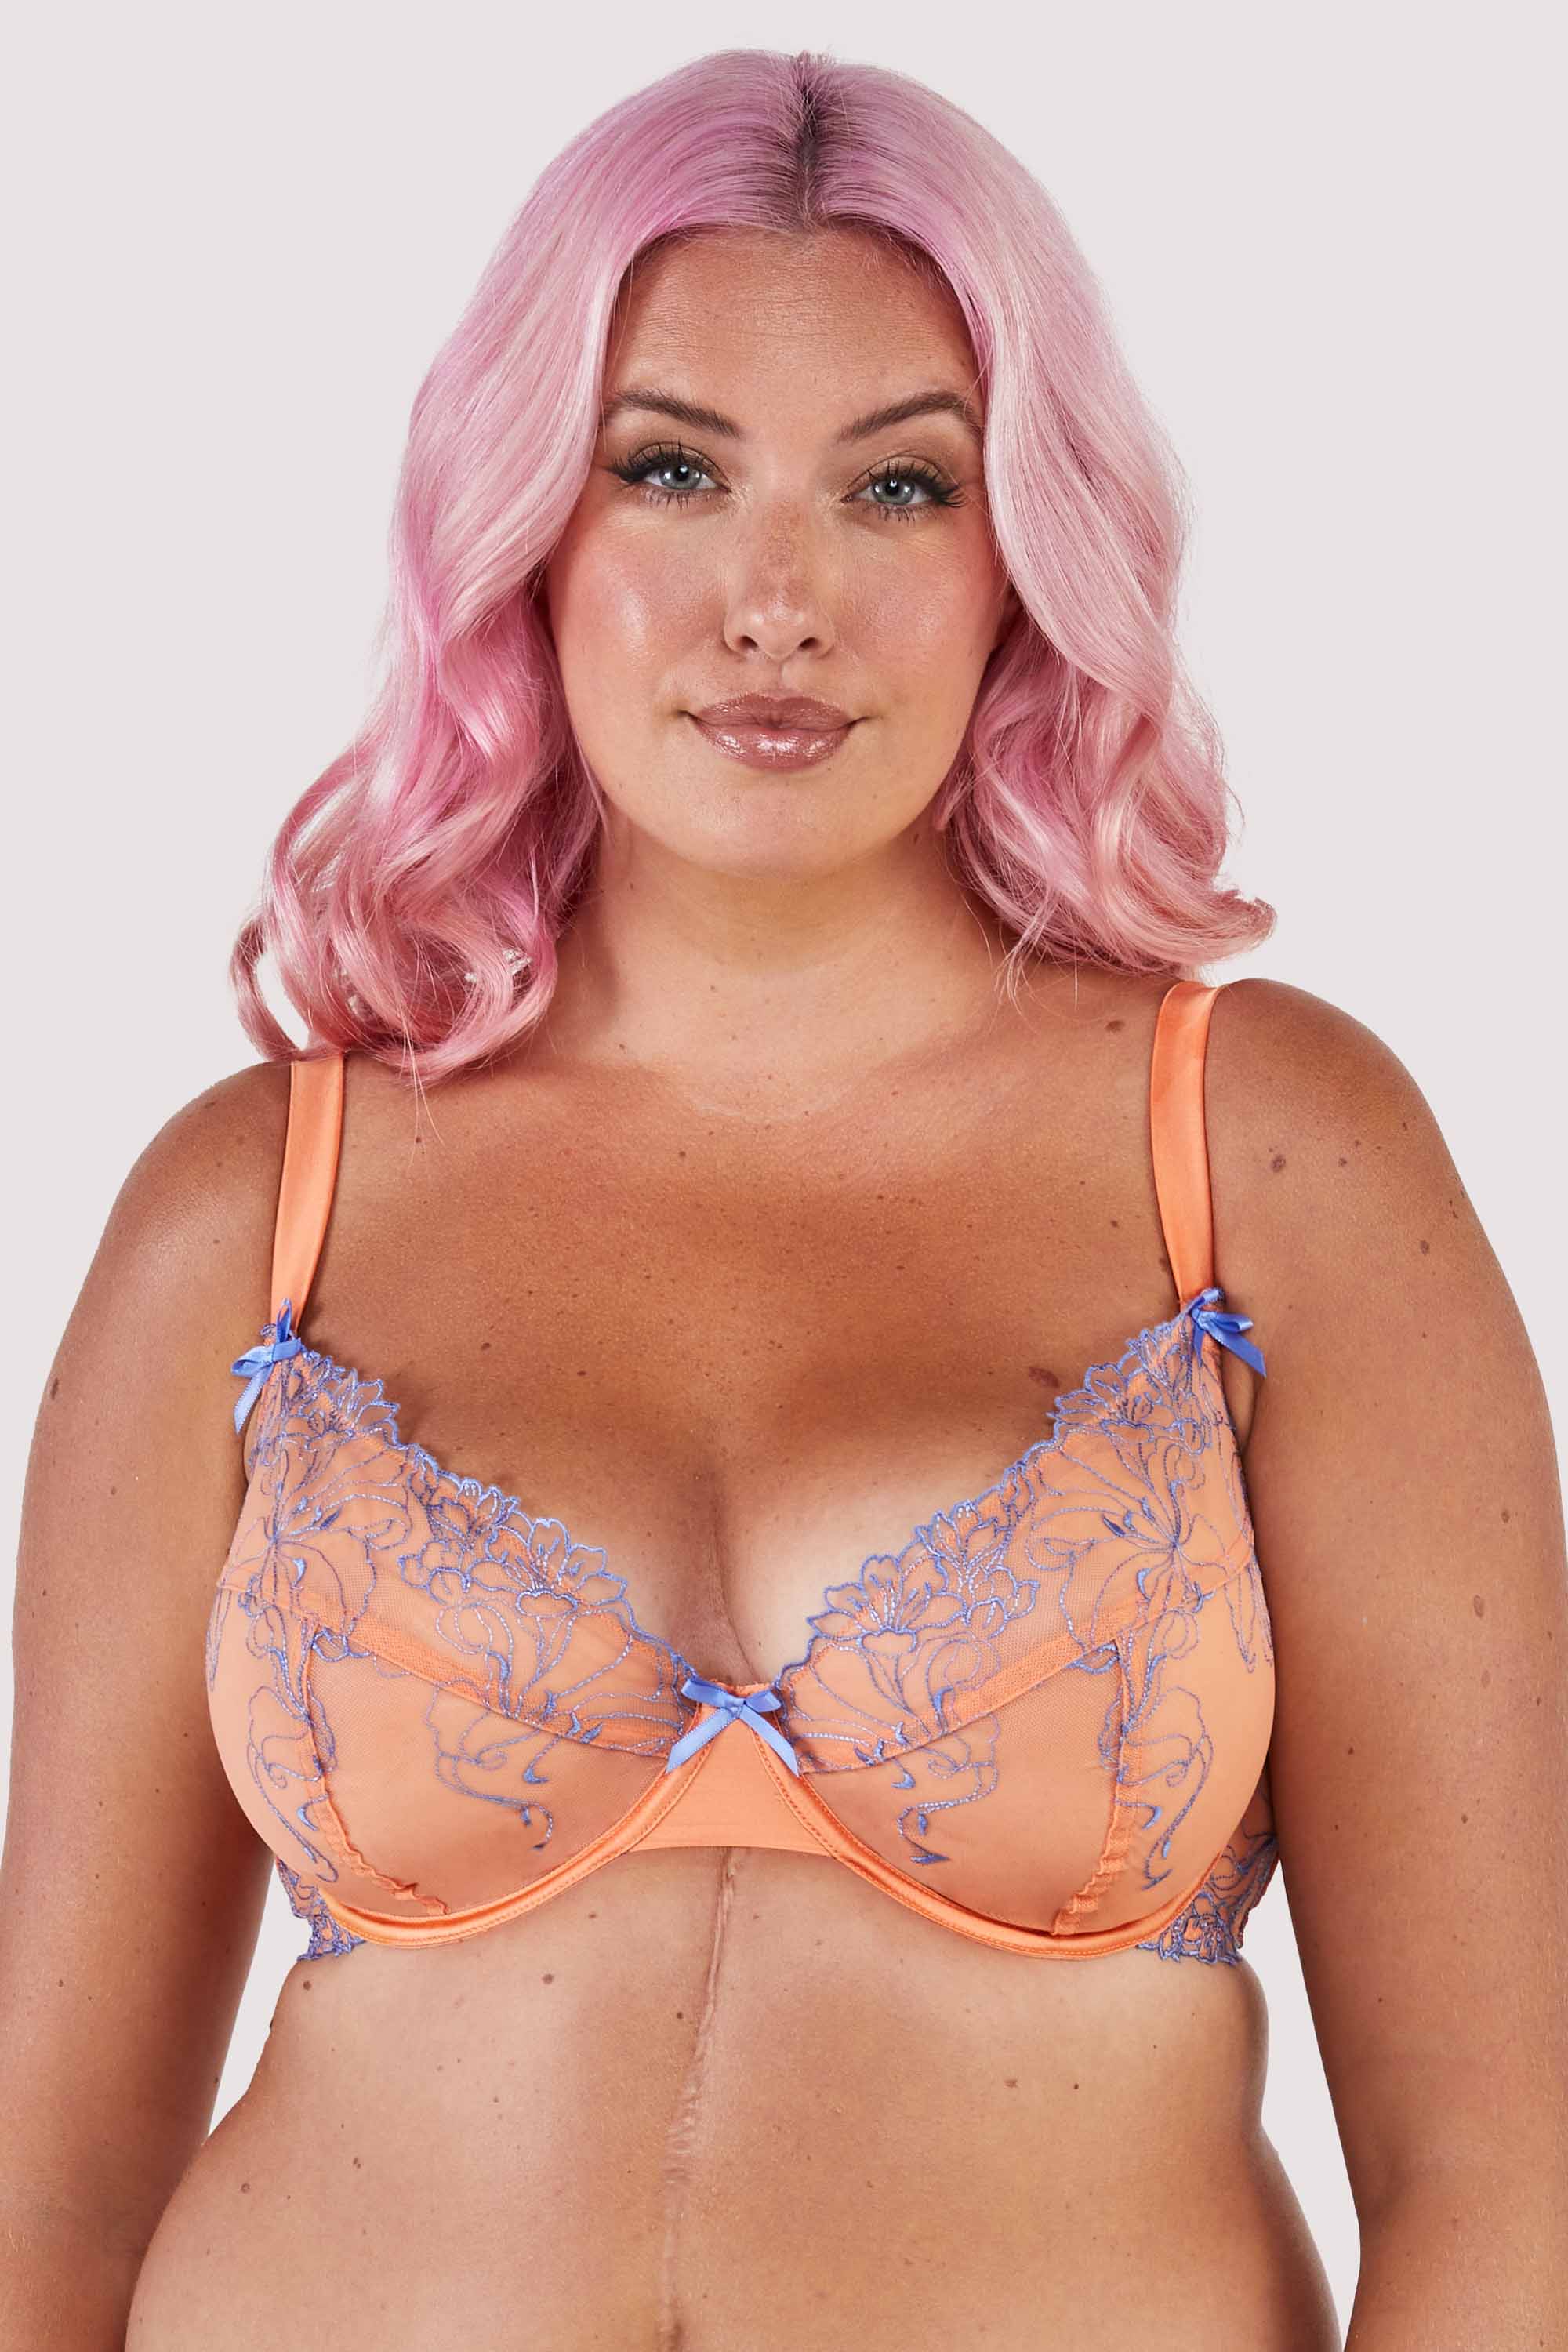 Mesh and lace orange bra with lilac/blue lace embroidery accents and bows.